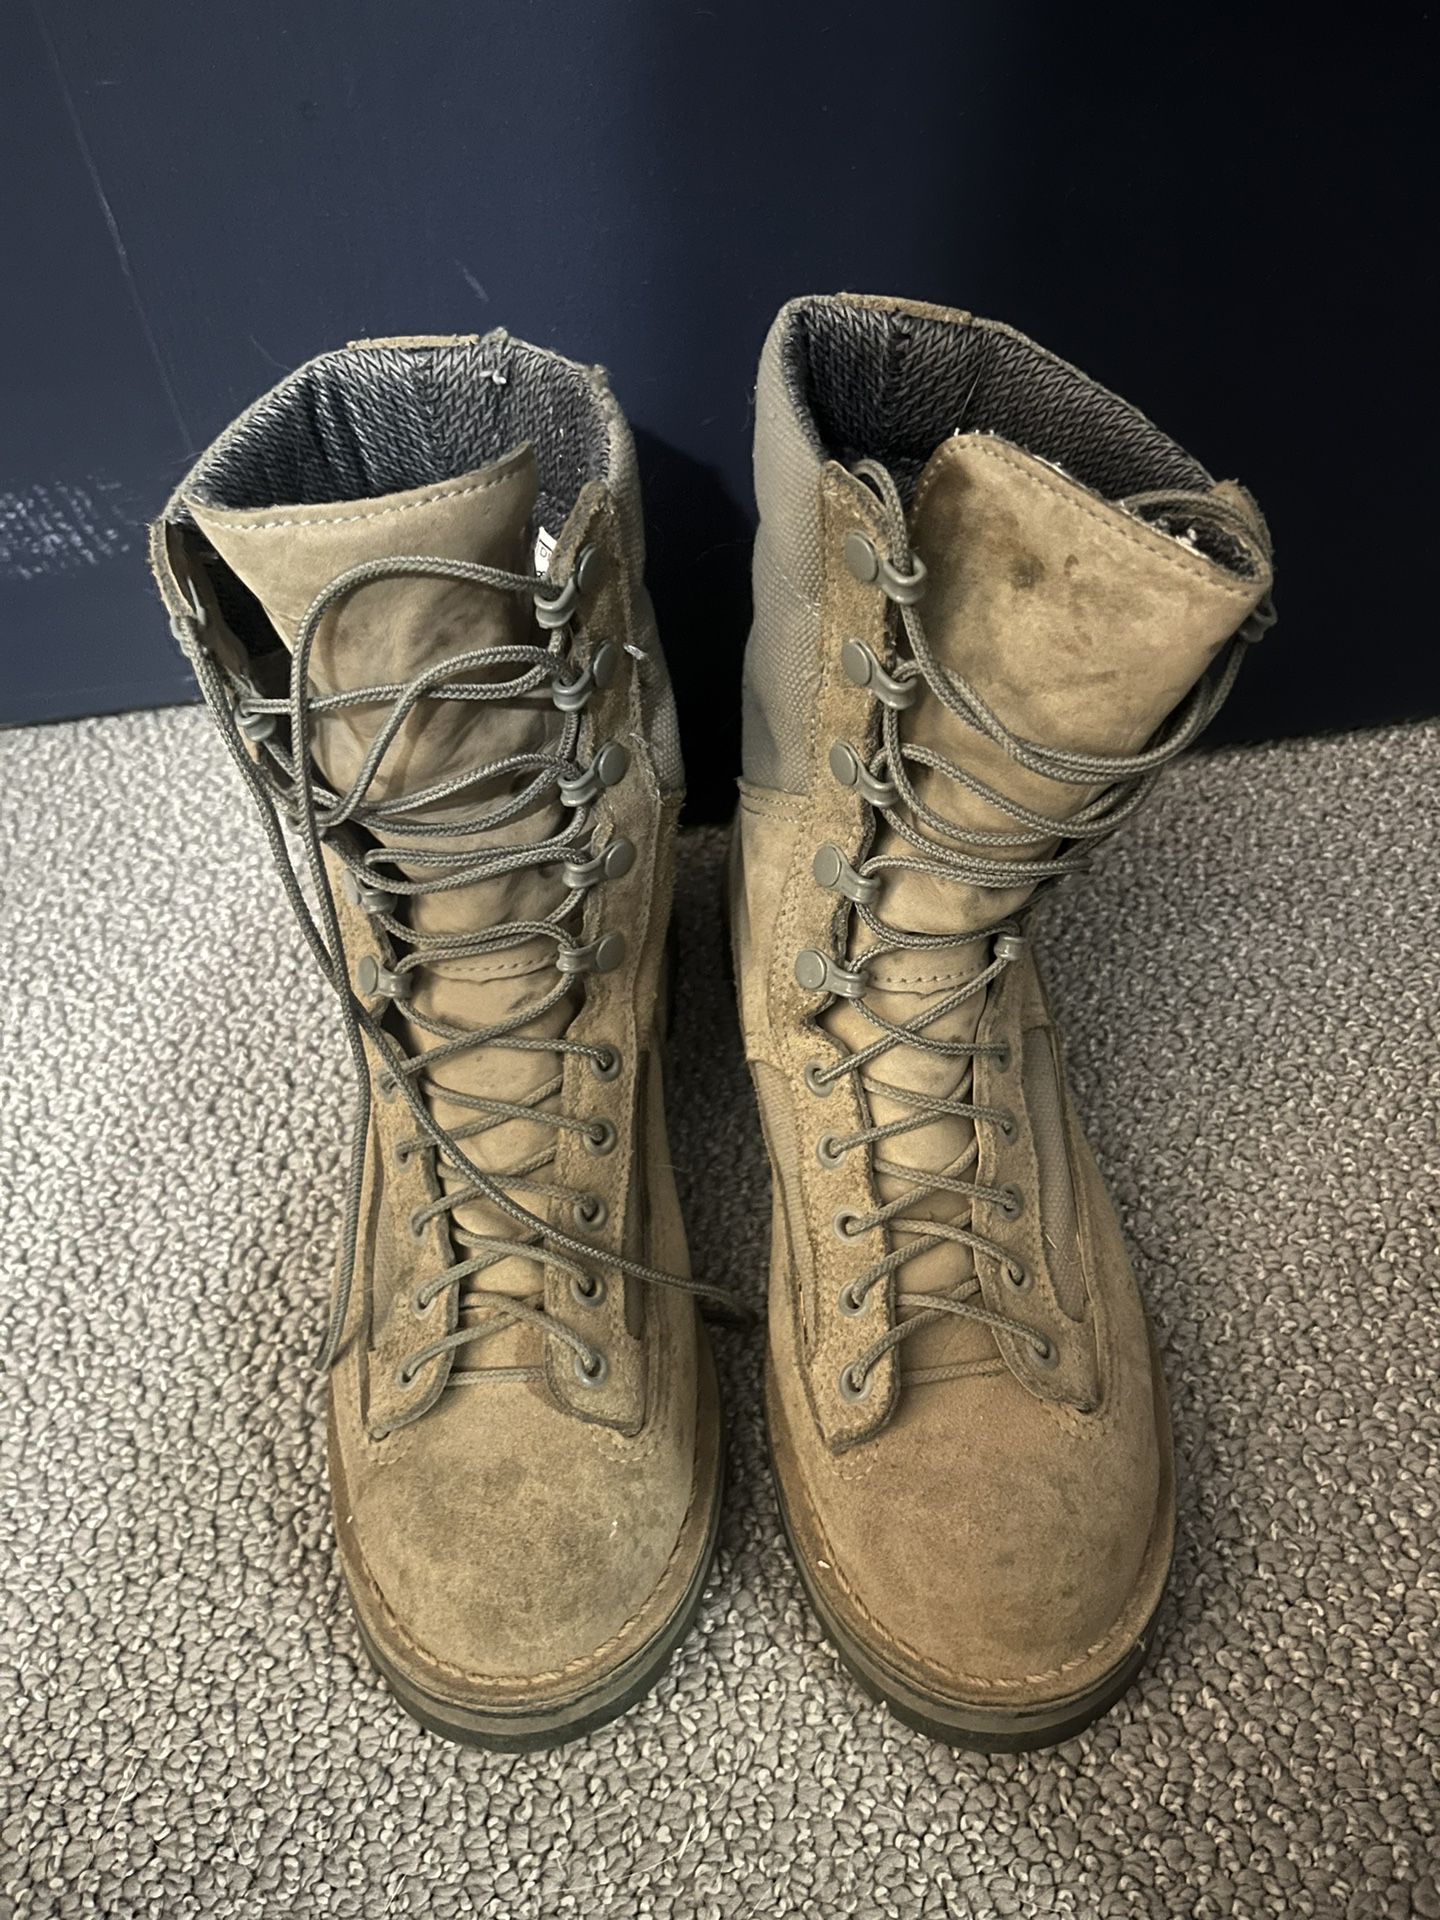 Boots Danner Military 8D